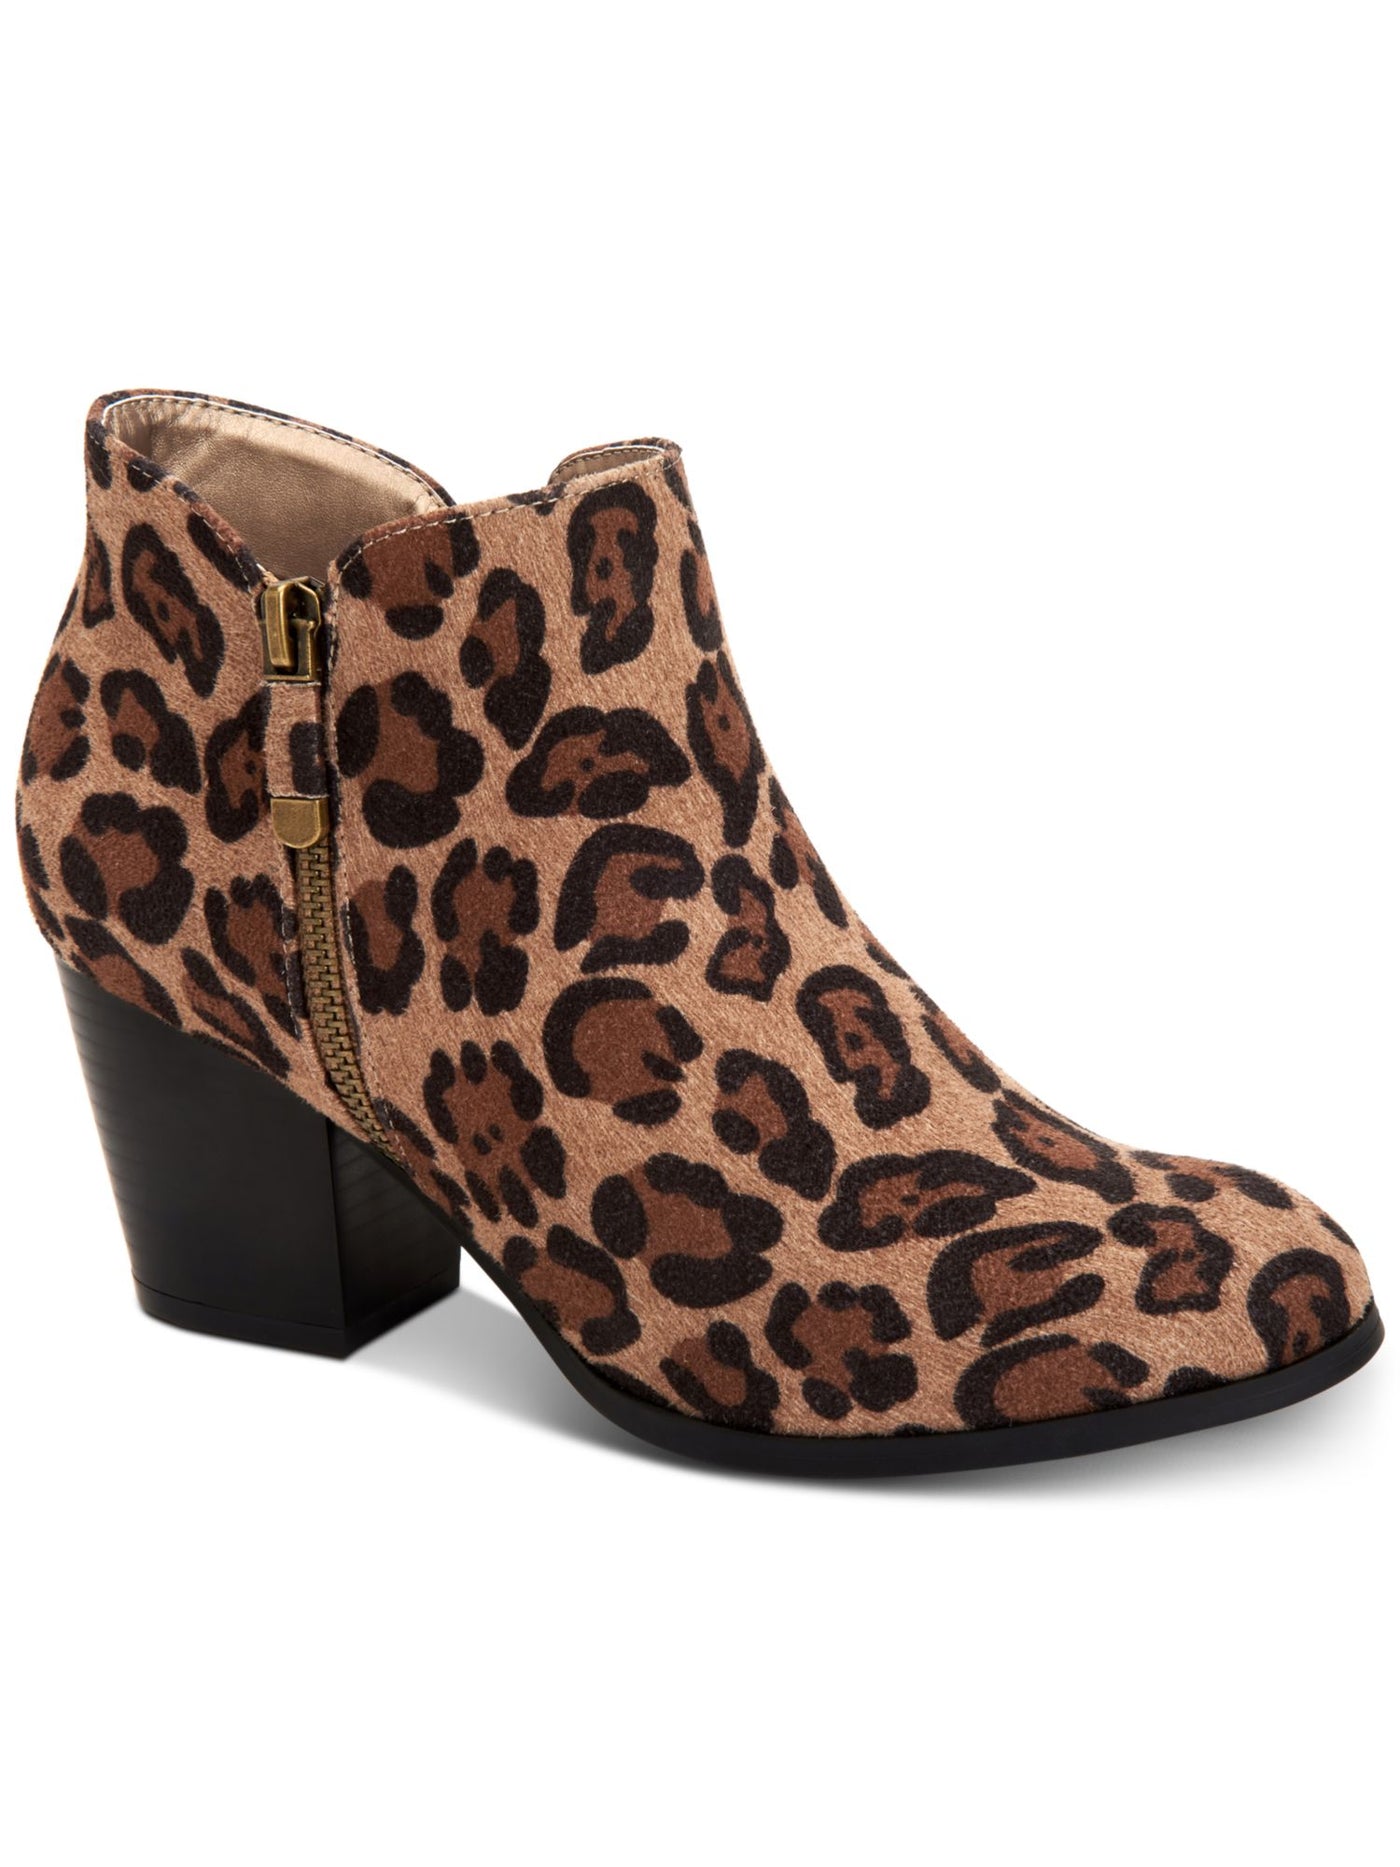 STYLE & COMPANY Womens Beige Animal Print Leopard Print Notched At Sides Cushioned Zipper Accent Masrinaa Almond Toe Block Heel Booties 11 M